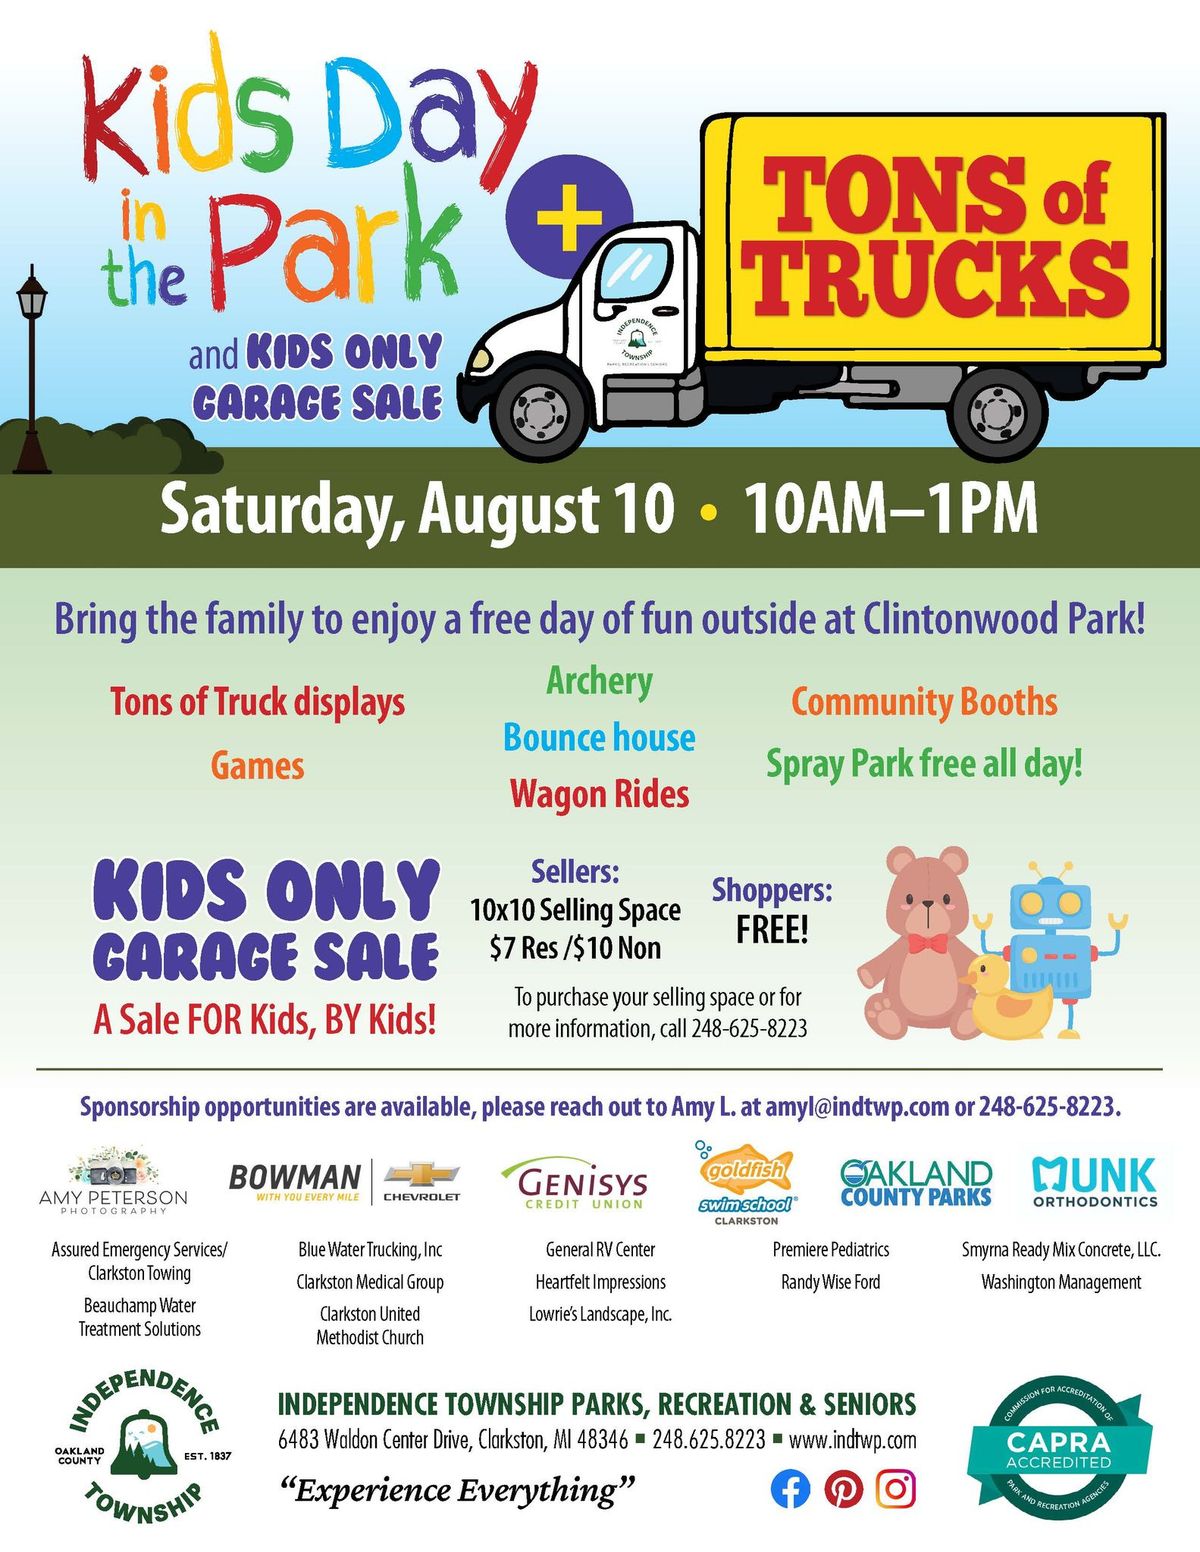 Kids Day in the Park featuring Tons of Trucks and Kids Only Garage Sale